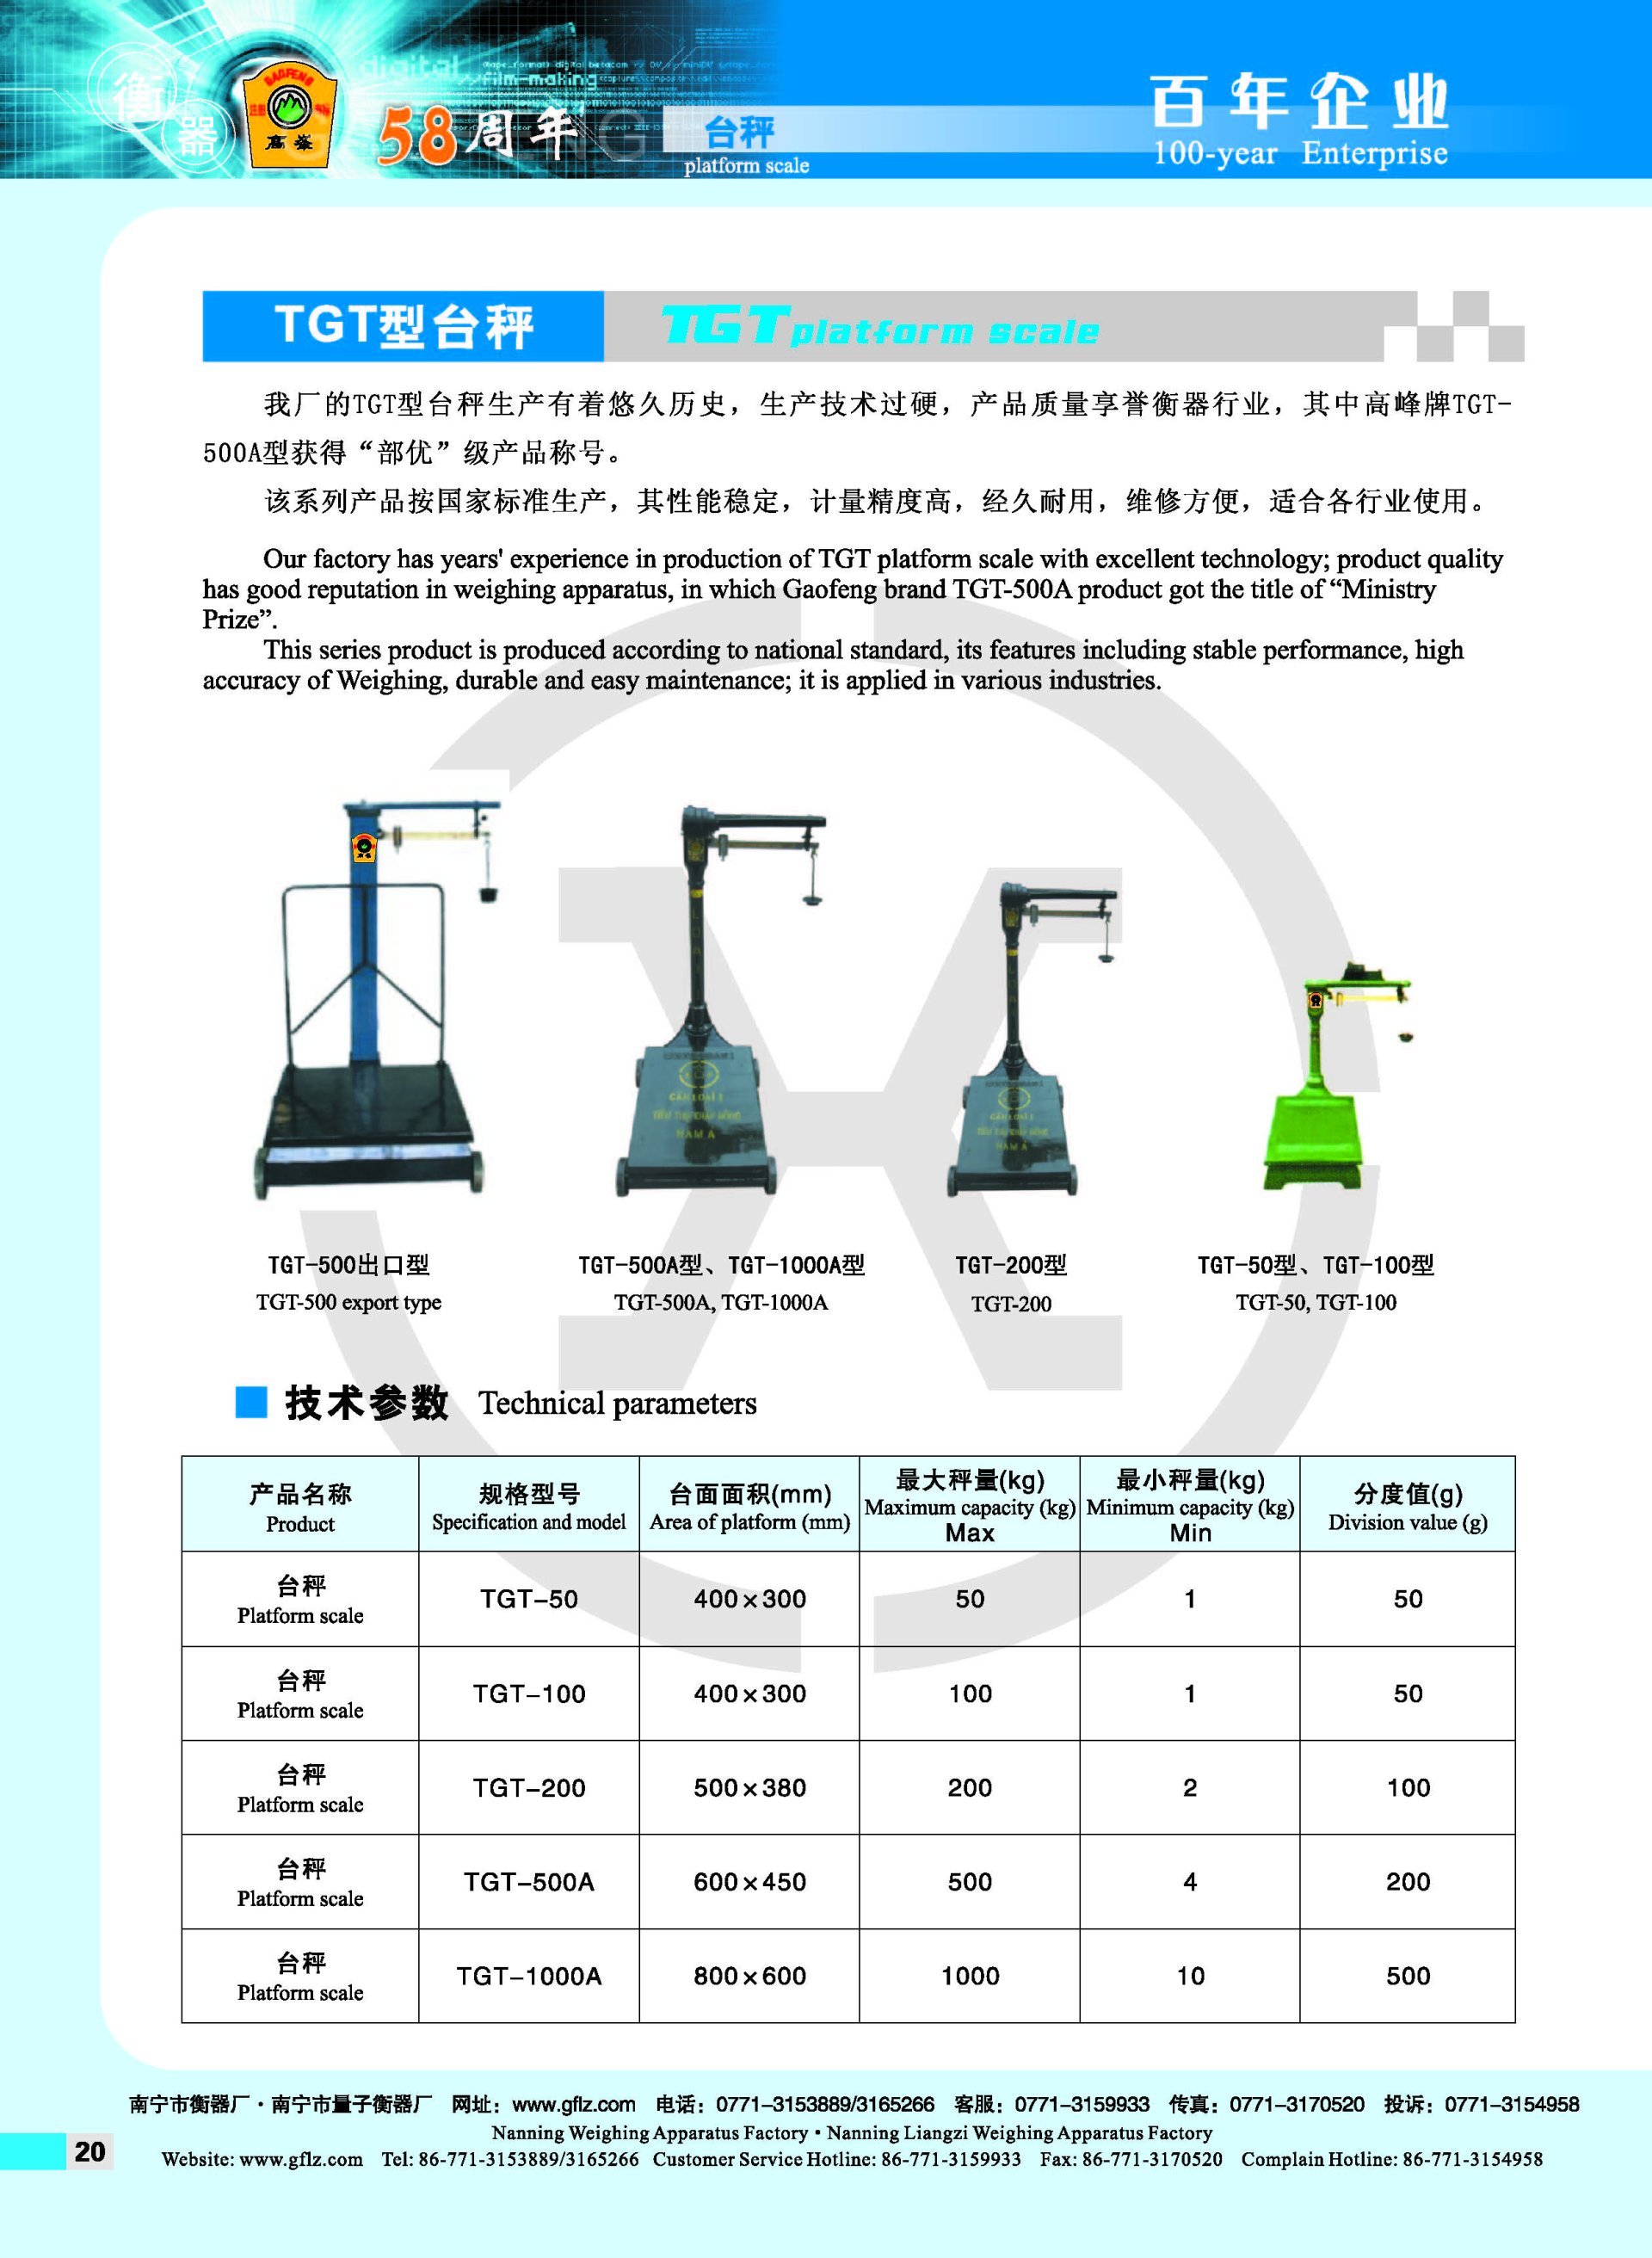 Nanning Weighing Instrument Factory